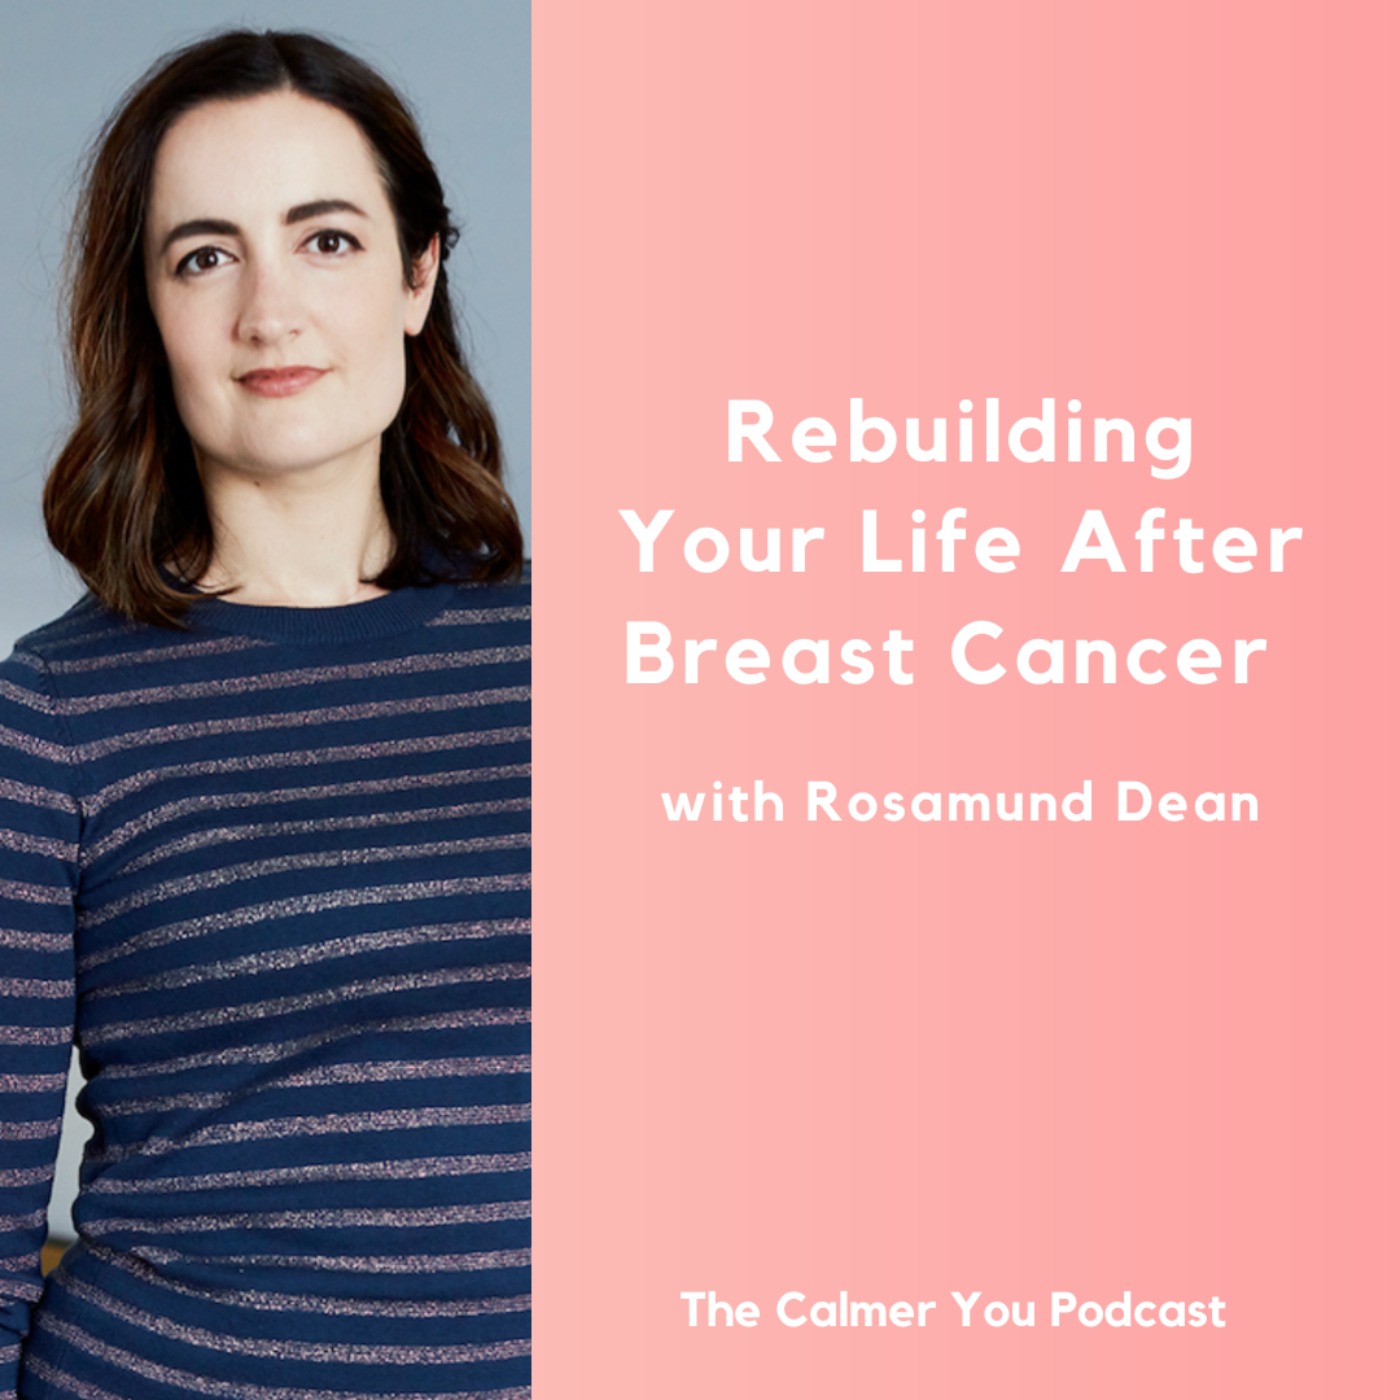 Ep 207. Rebuilding Your Life After Breast Cancer with Rosamund Dean